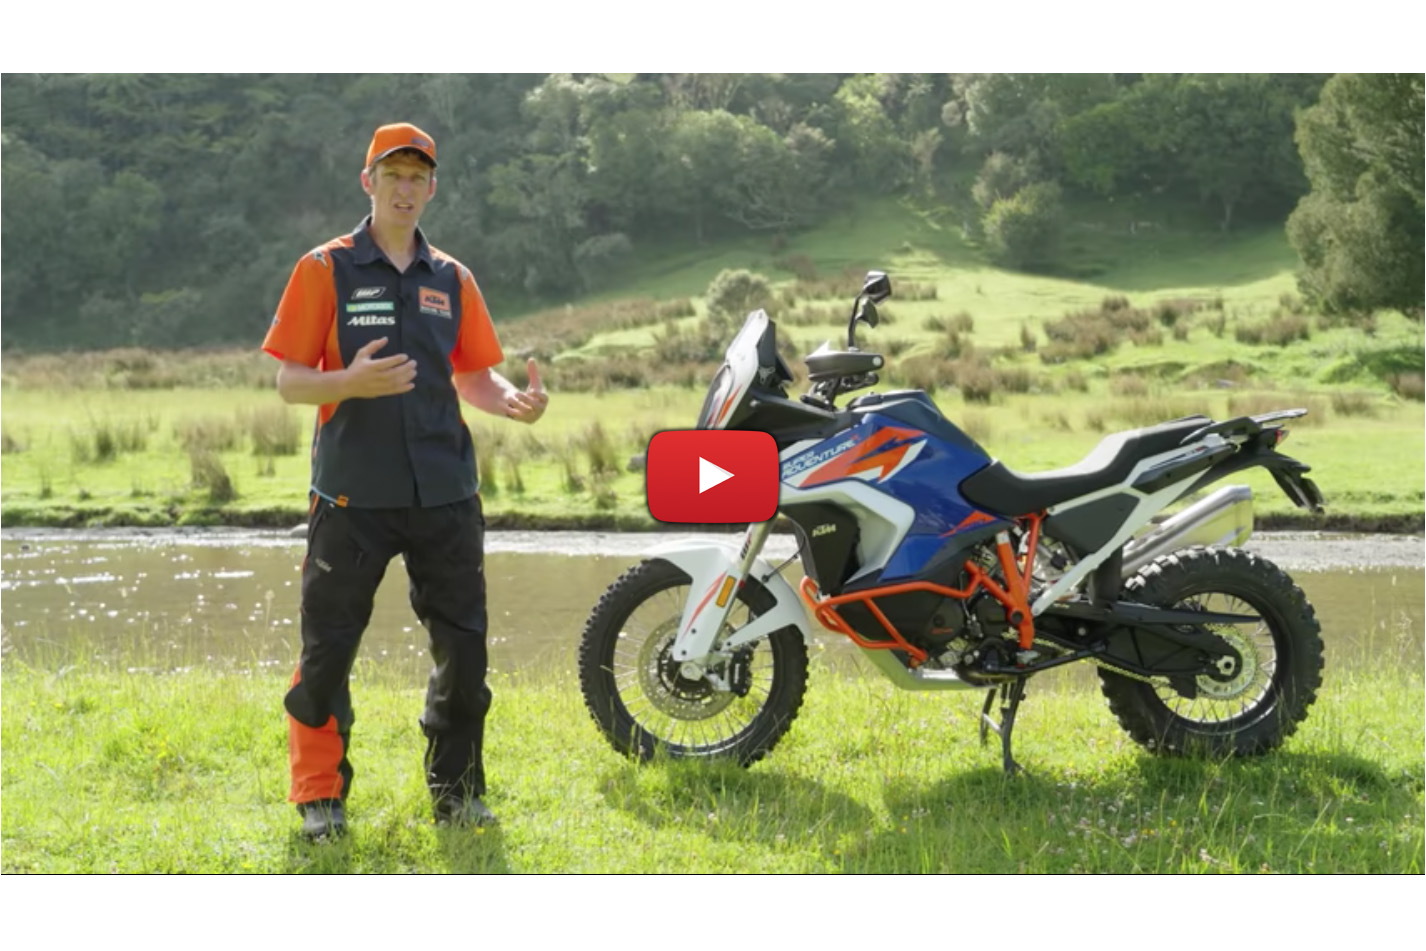 KTM’s 1290 Super Adventure R ridden and rated by Chris Birch